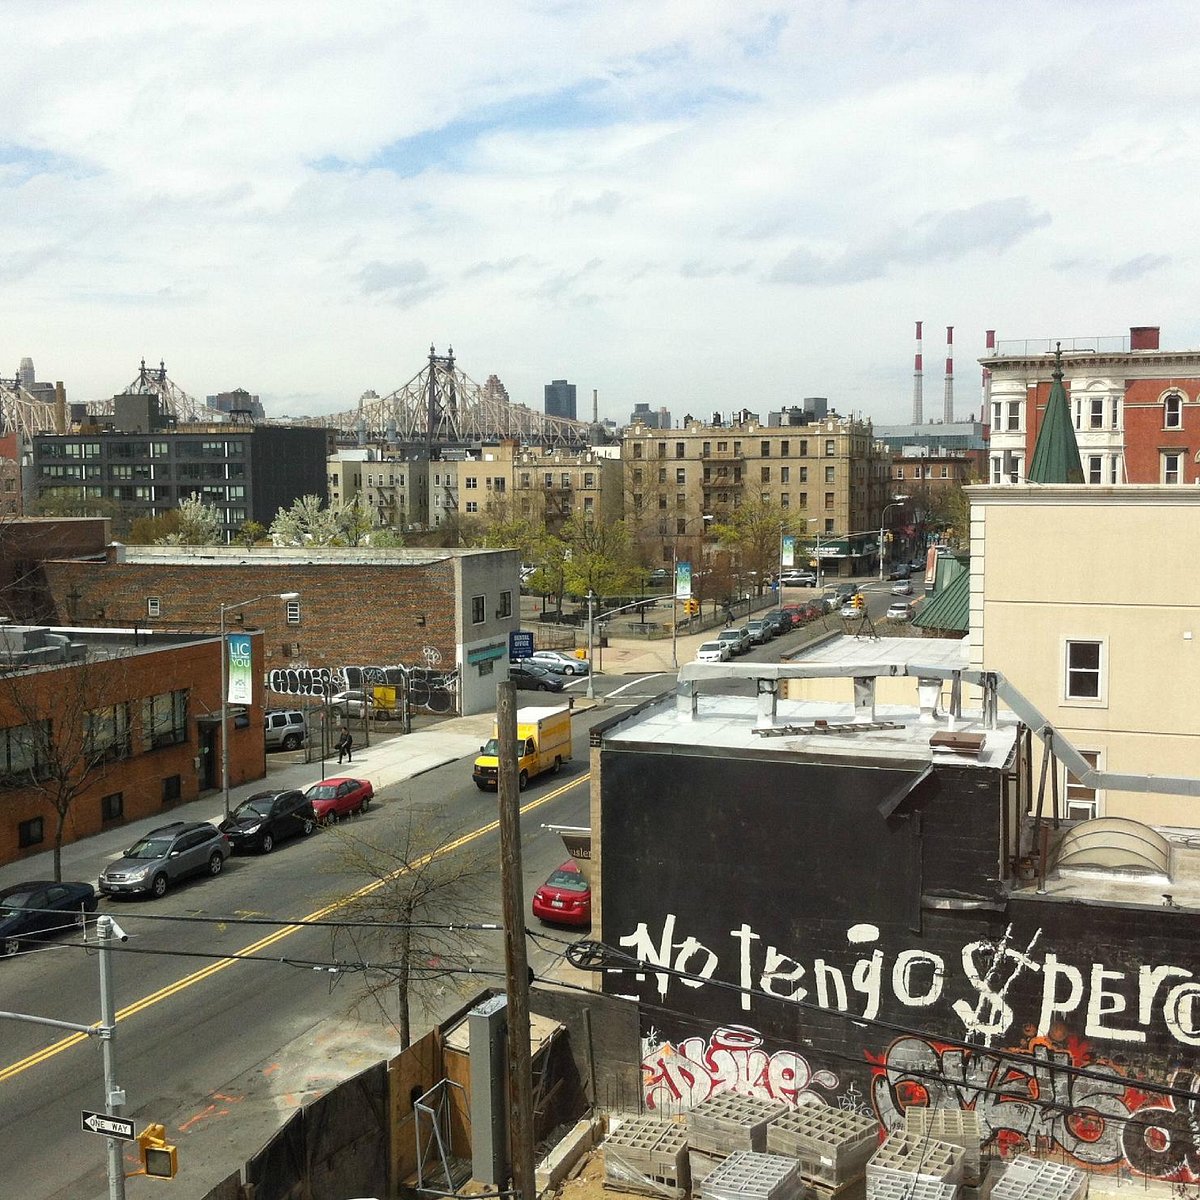 PS1 (Long Island City) - 2022 All Need to Know BEFORE You Go (with Photos) Tripadvisor